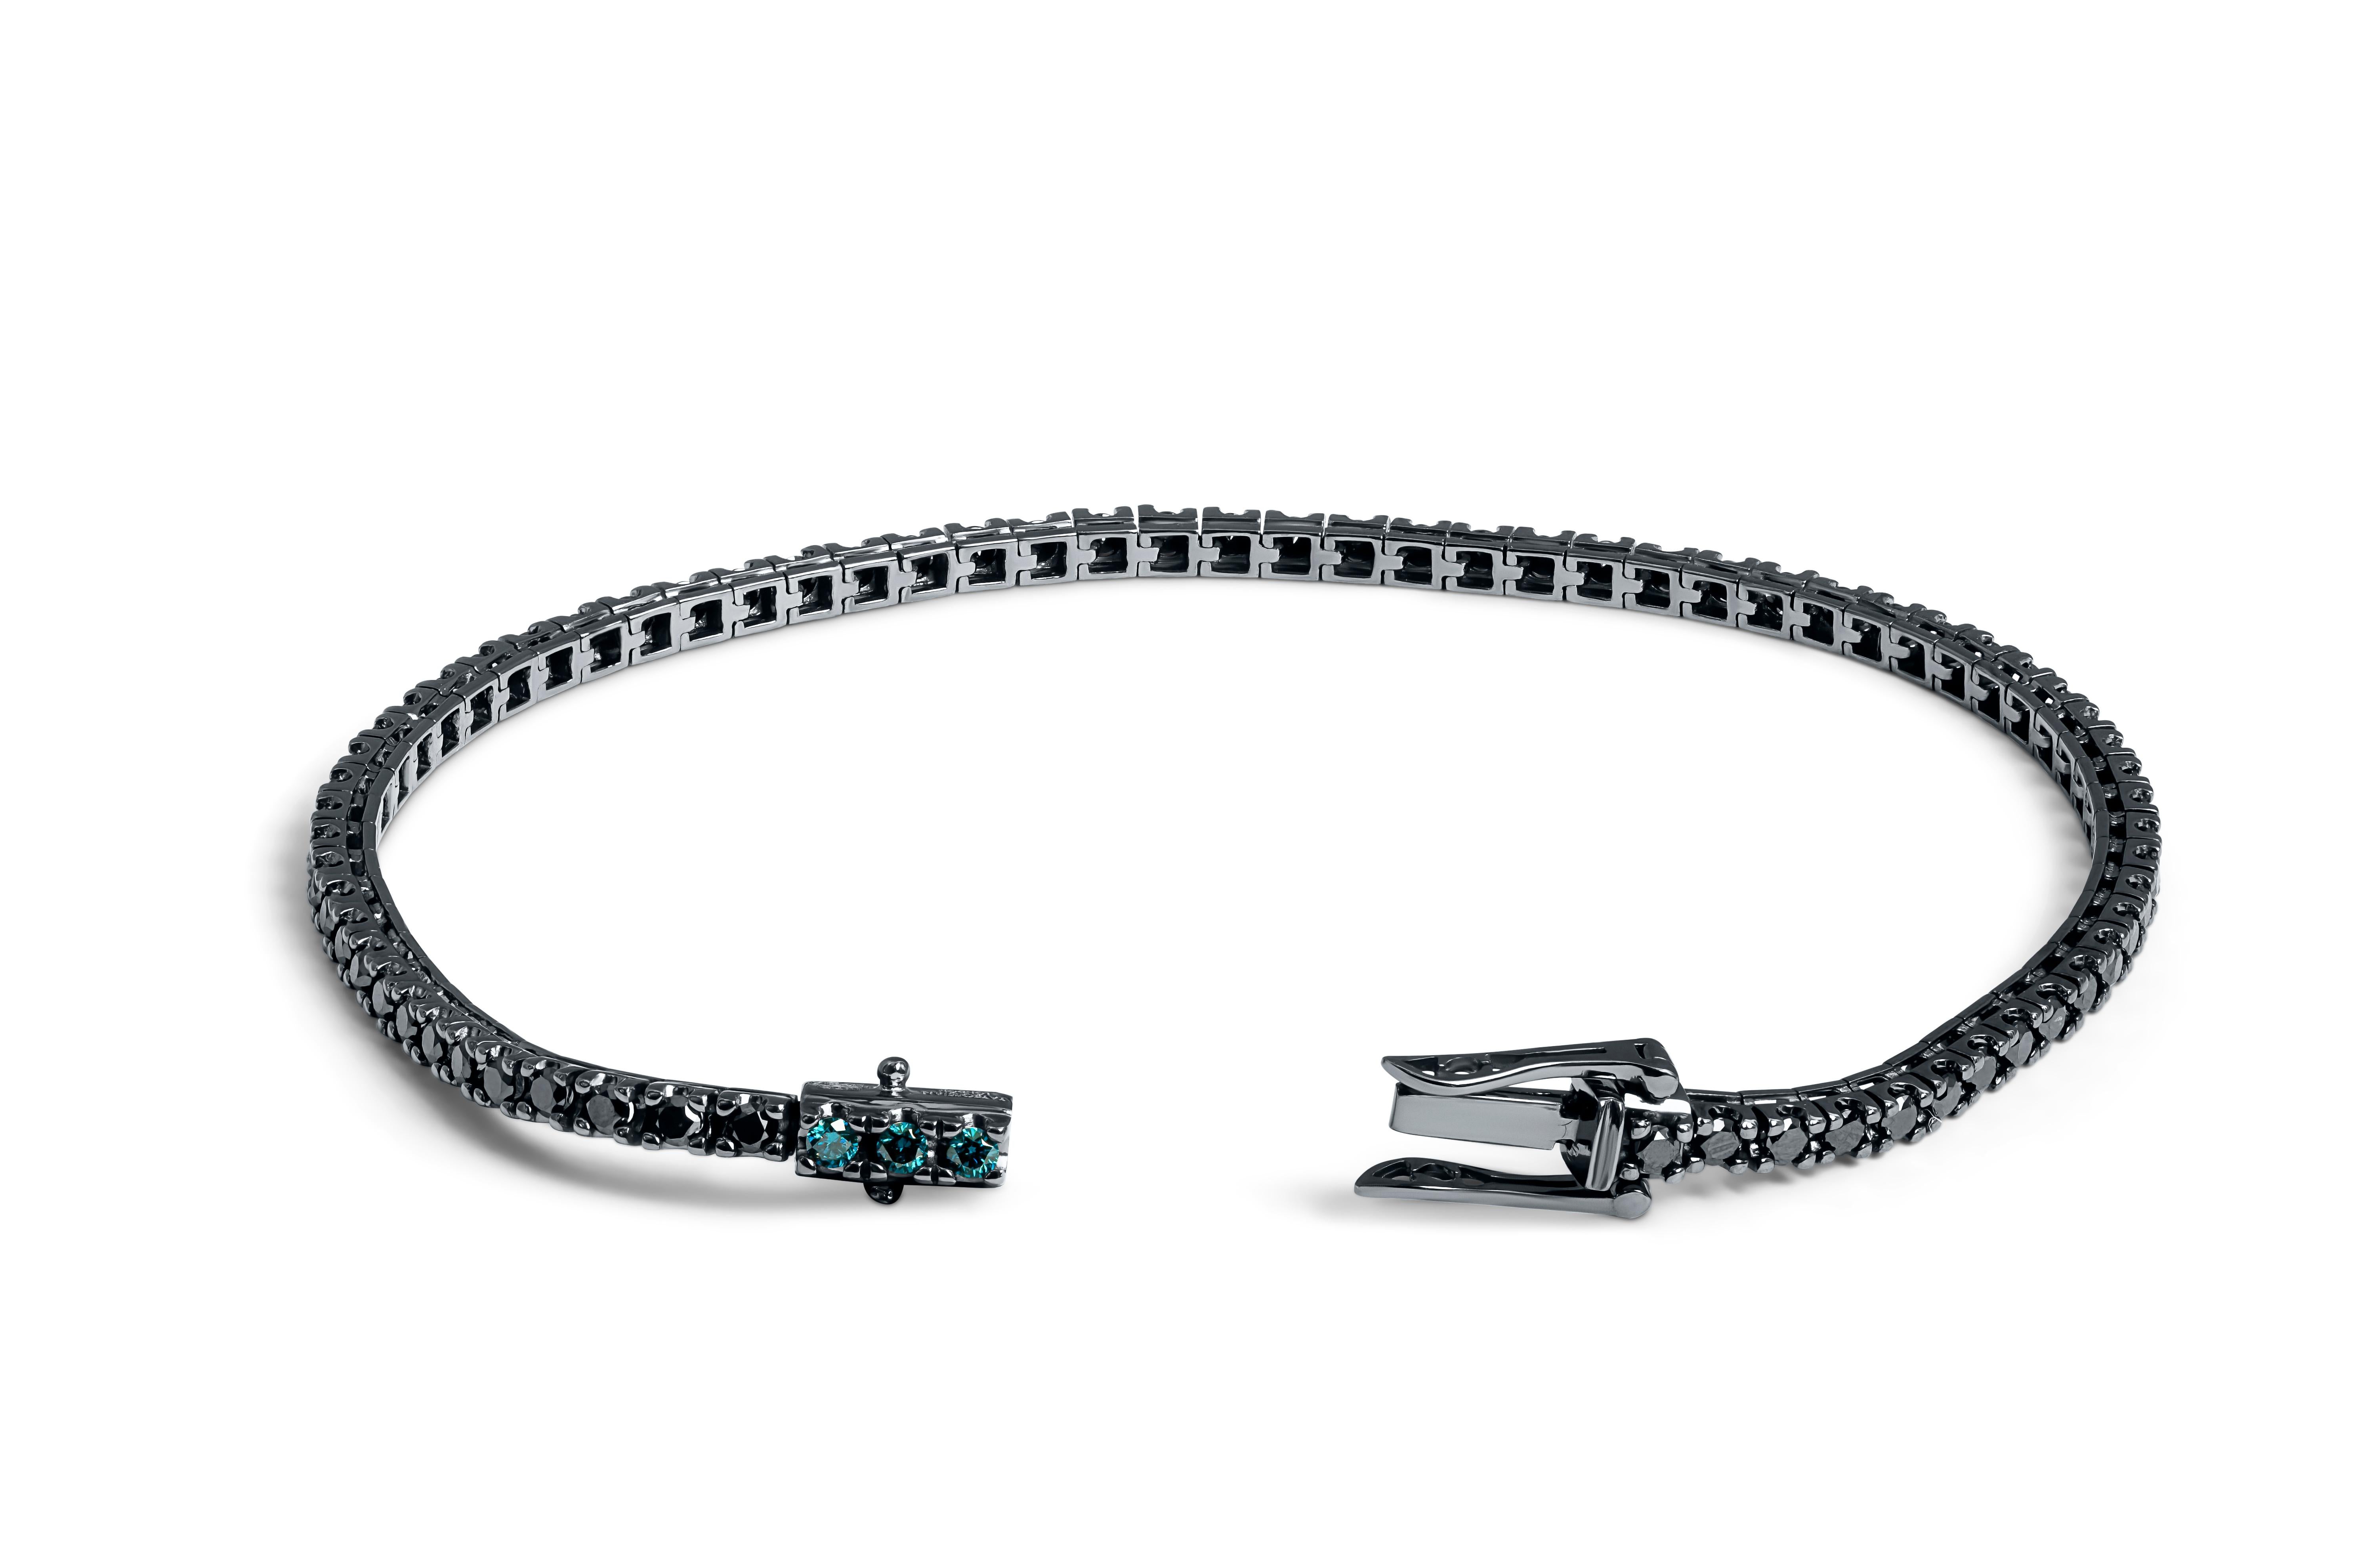 18K White Gold Tennis bracelet in black rhodium plating with Blue Diamonds - L In New Condition For Sale In Fulham business exchange, London